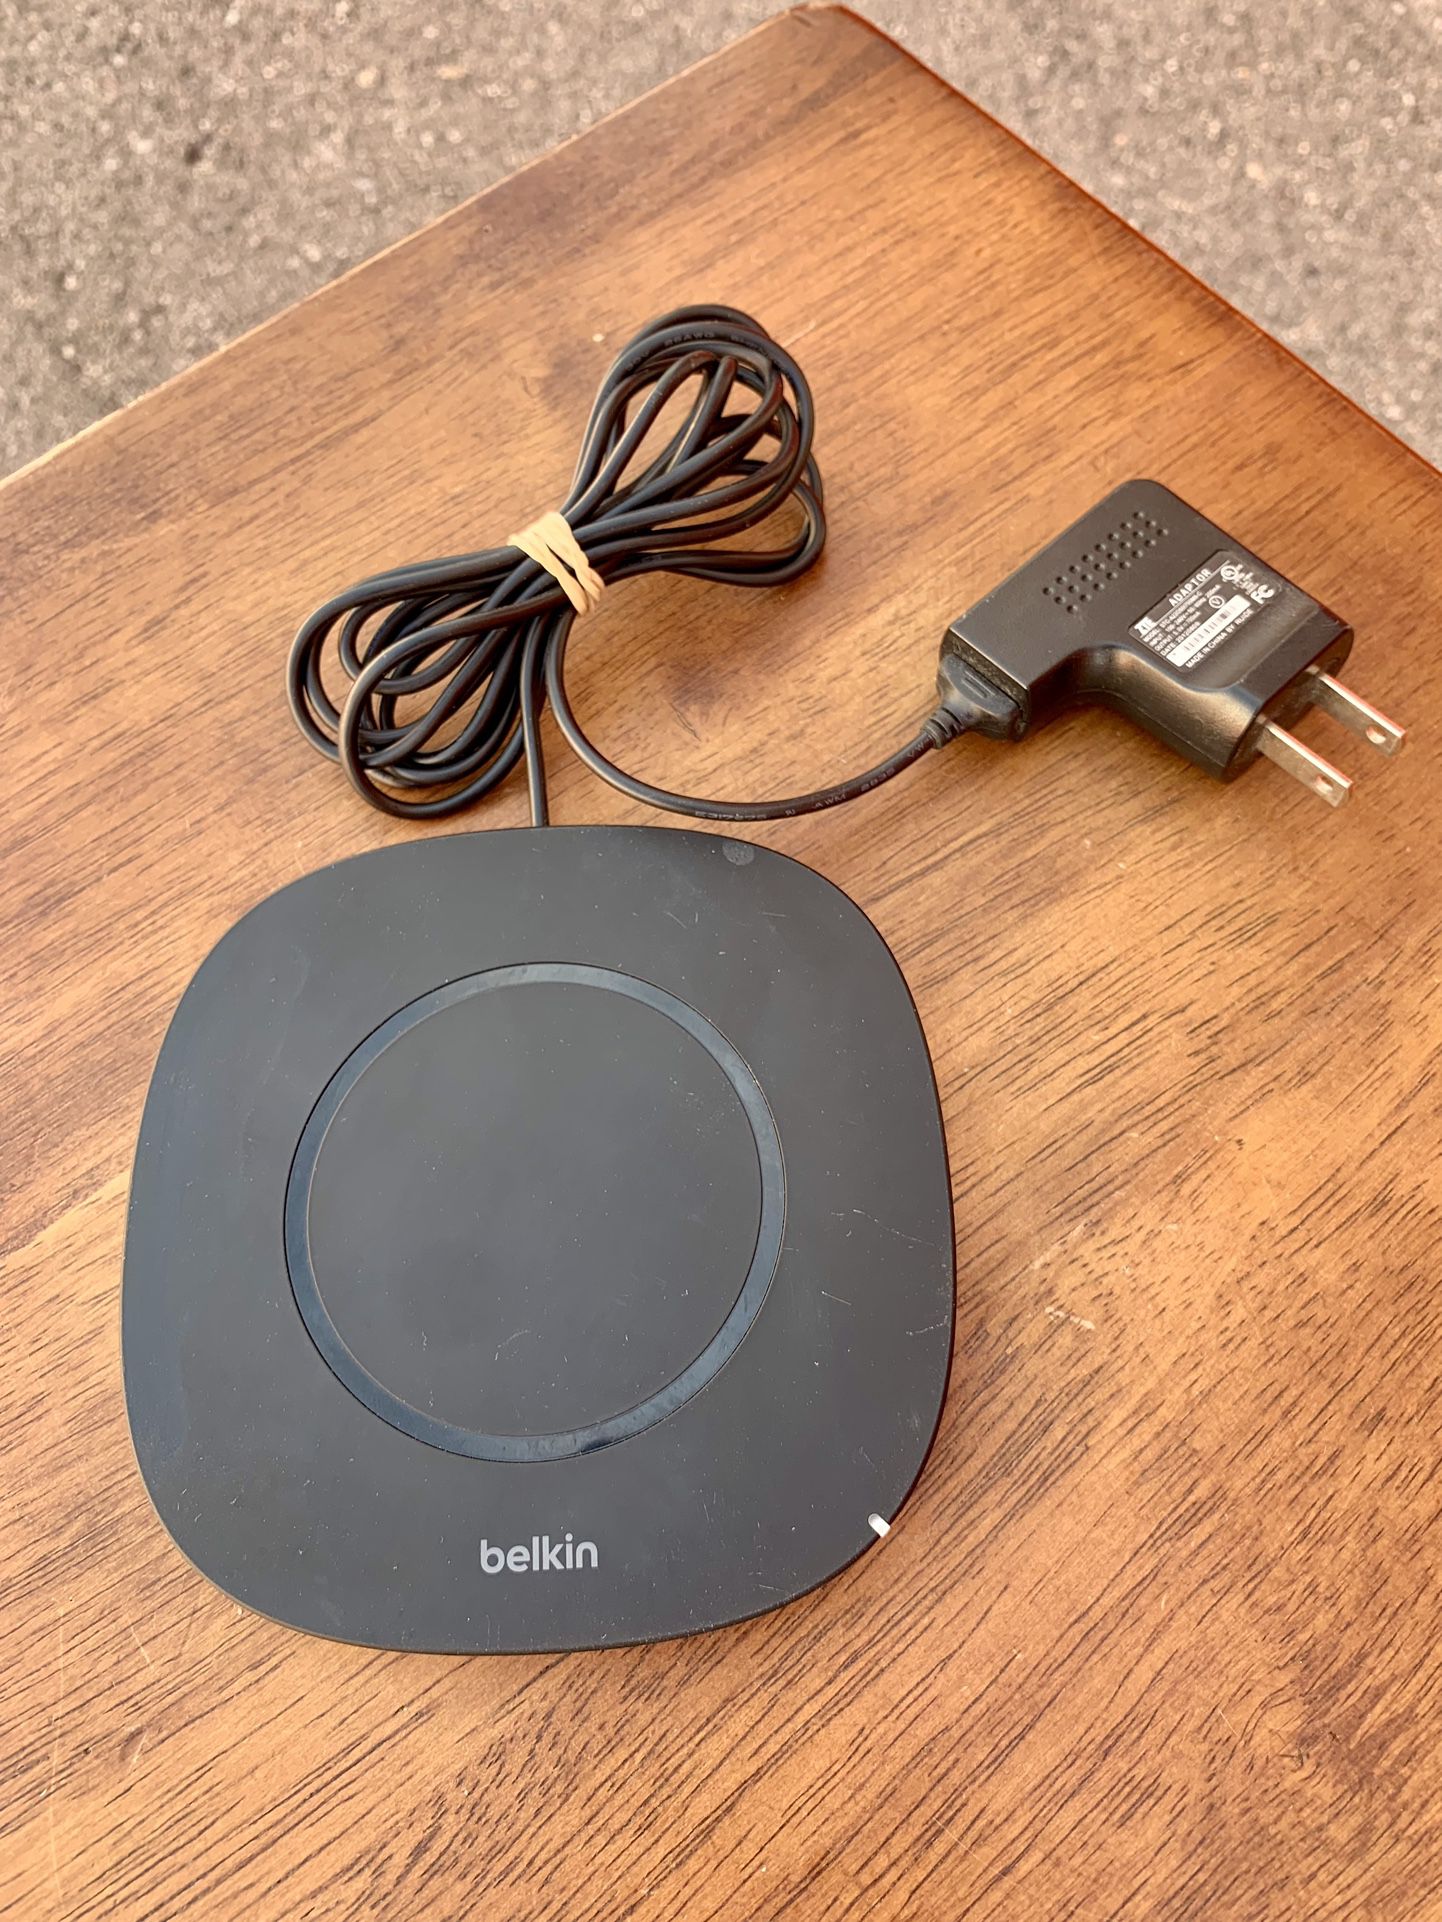 Belkin Boost Up Qi Wireless Charging Pad 5W – Universal Wireless Charger for iPhone XR, XS, XS Max / Samsung Galaxy S9, S9+, Note9 / LG, Sony and more